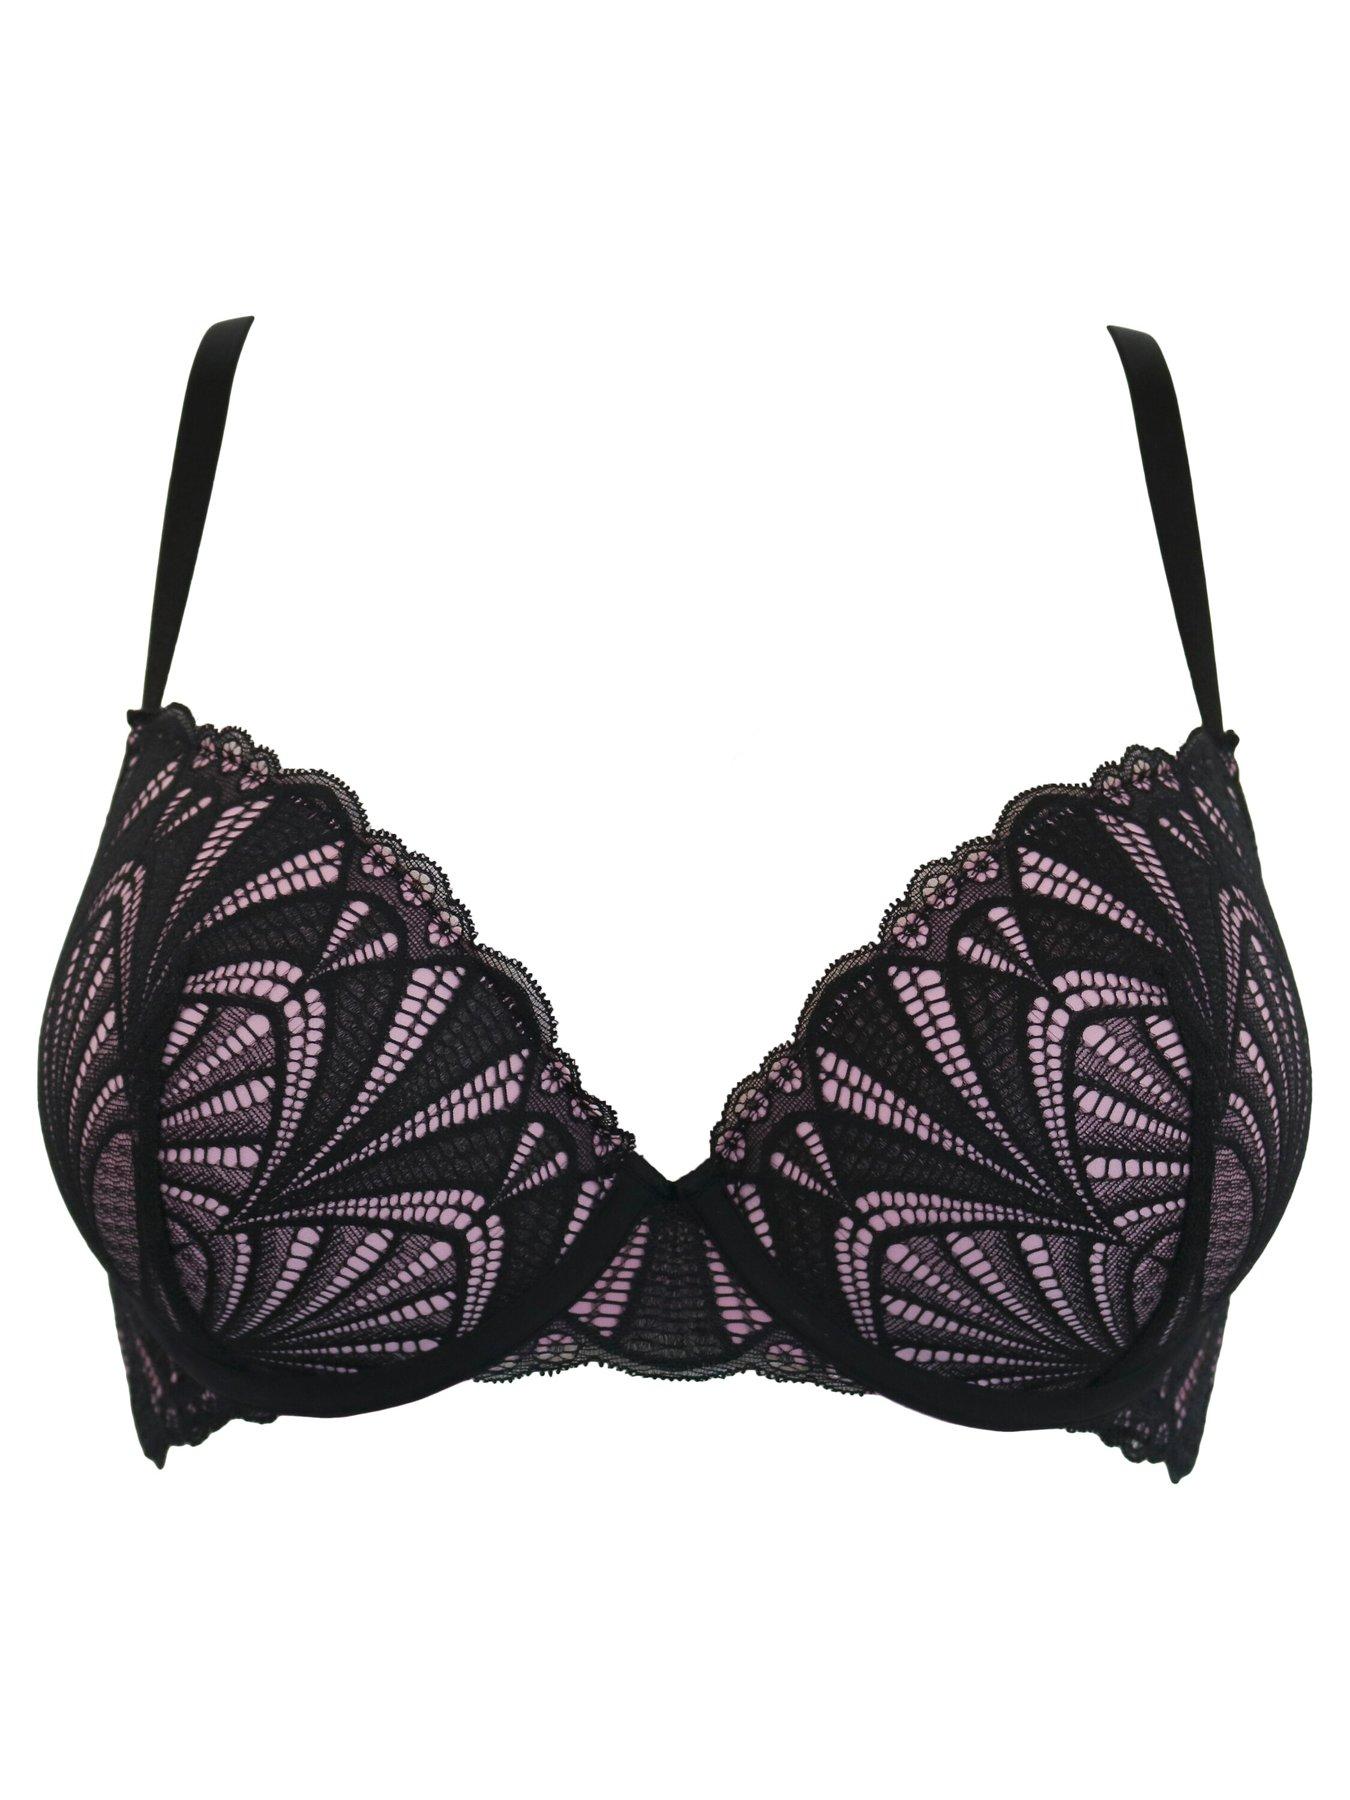 Pour Moi Romance Moulded Underwired Push Up Plunge Bra